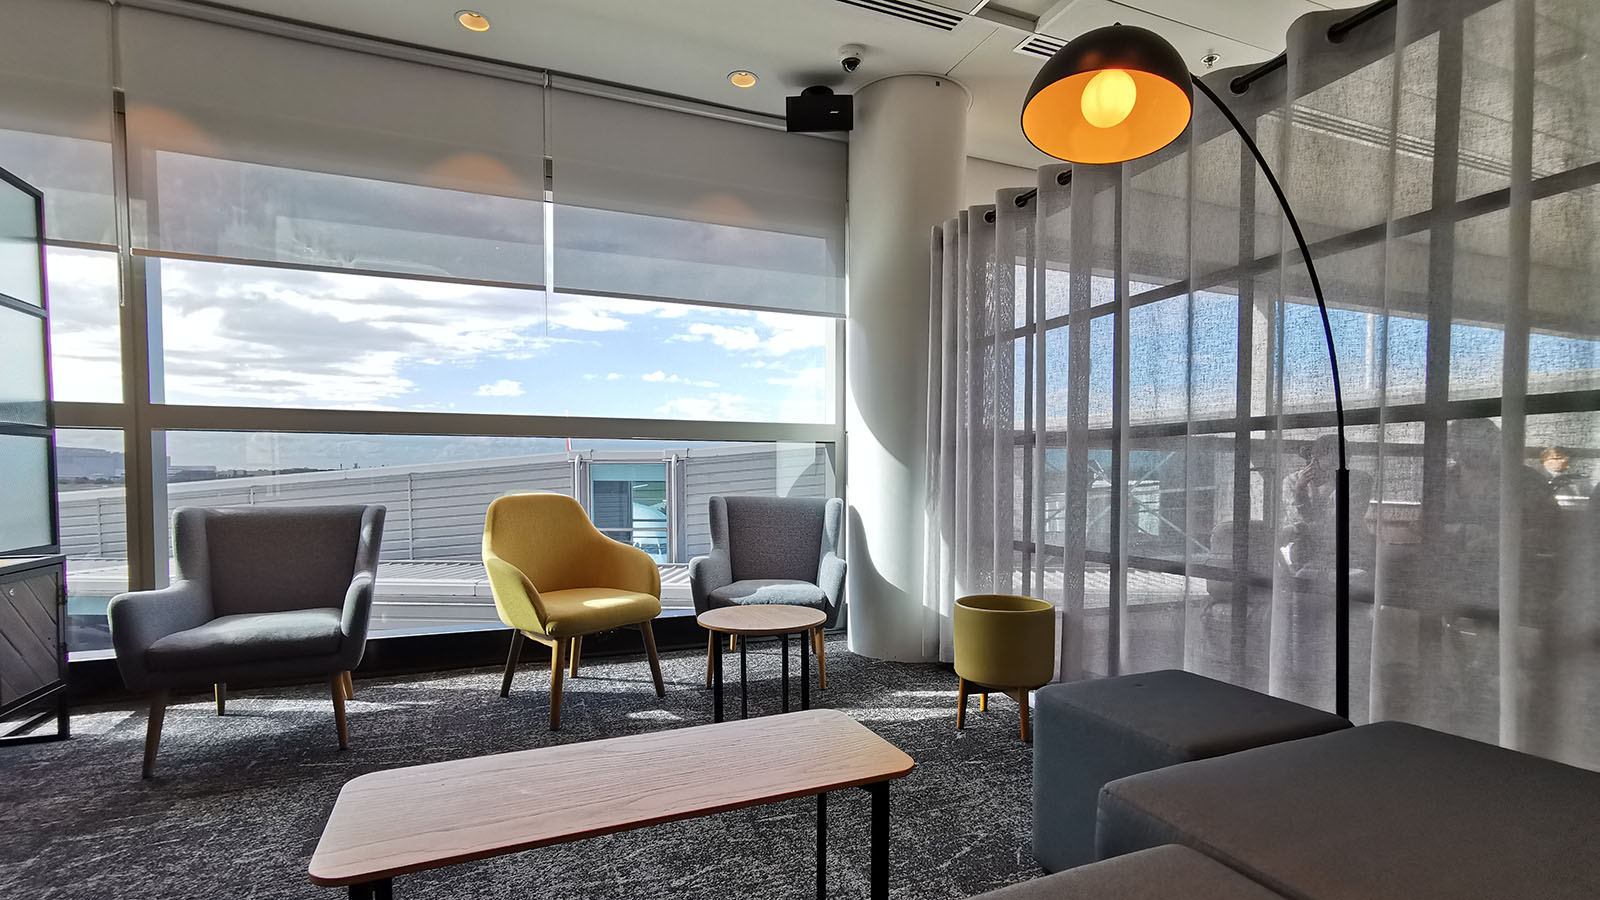 Seating with a window view at Brisbane's Aspire Lounge